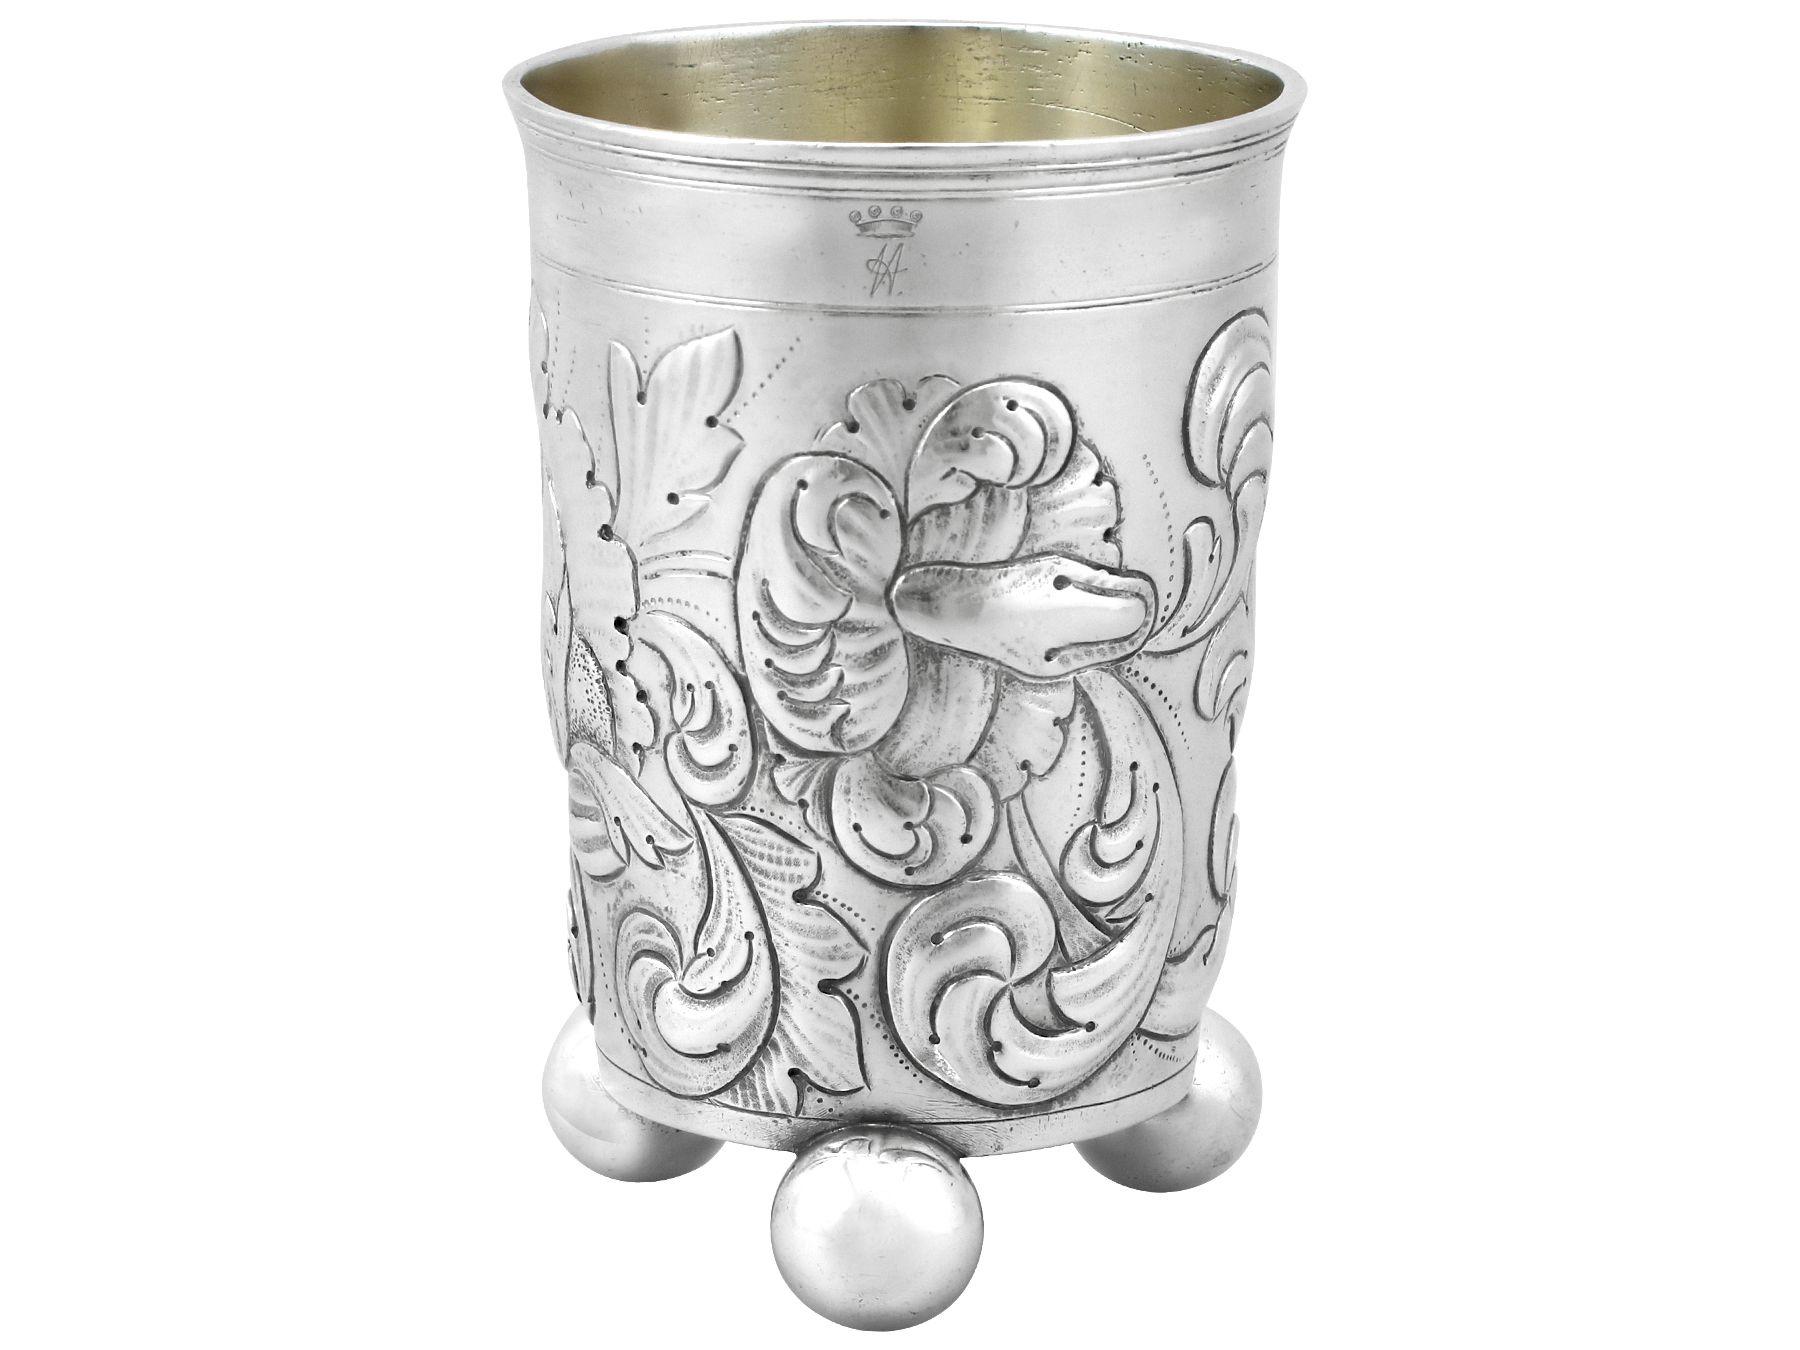 An exceptional, fine and impressive antique German silver beaker; an addition to our continental silverware collection

This exceptional antique German silver beaker has a subtly tapering cylindrical form.

The body of the beaker is embellished